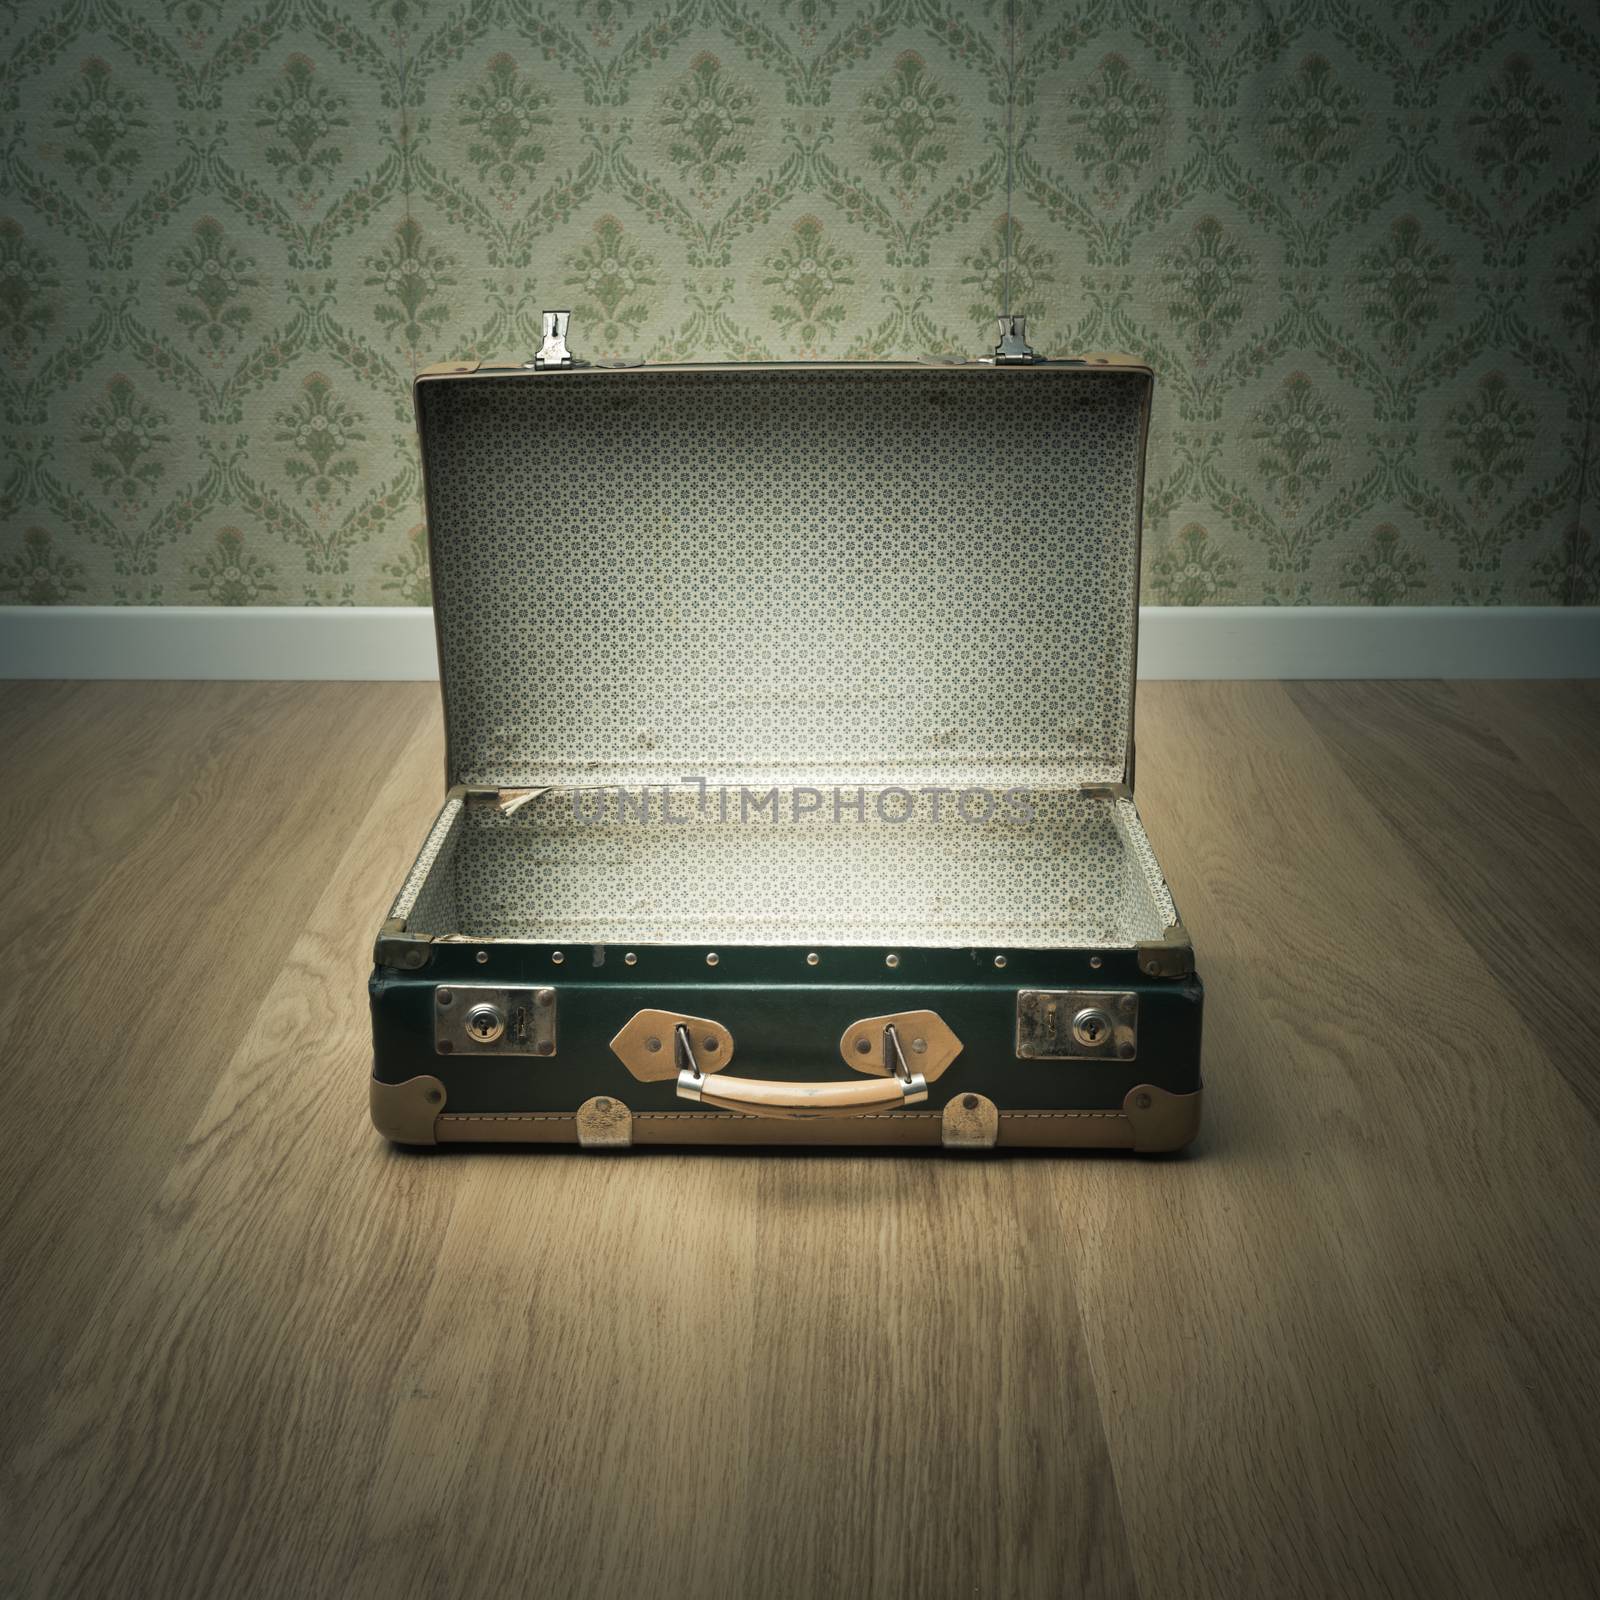 Open vintage suitcase on wooden floor with vintage wallpaper on background.